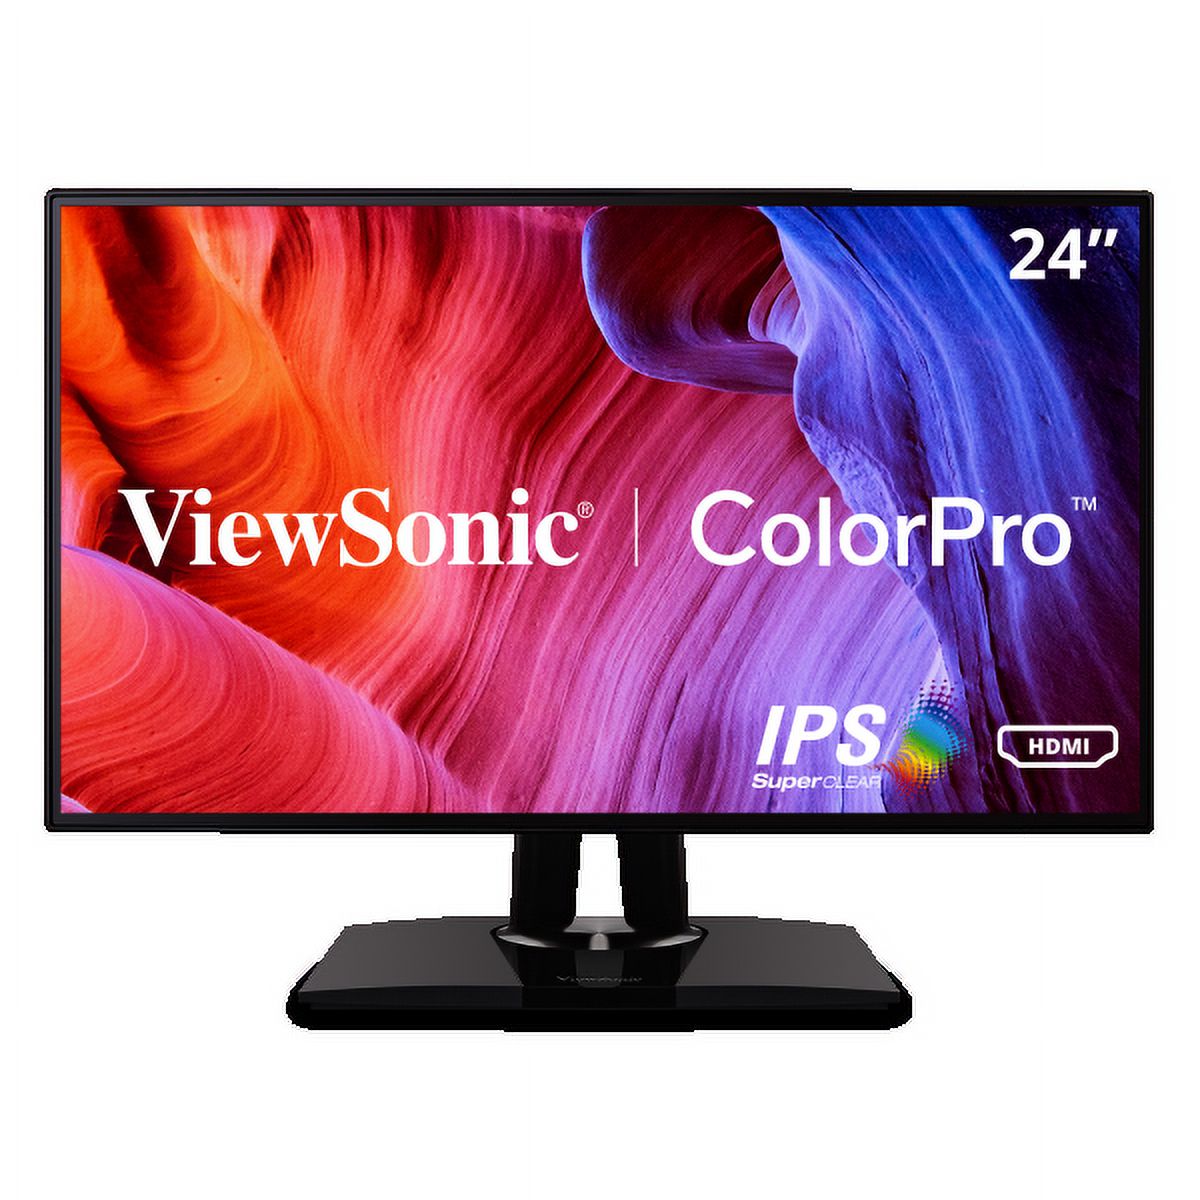 ViewSonic VP2468 24-Inch Premium IPS 1080p Monitor with Advanced Ergonomics, ColorPro 100% sRGB Rec 709, 14-bit 3D LUT, Eye Care, HDMI, USB, DP Daisy Chain for Home and Office - image 1 of 10